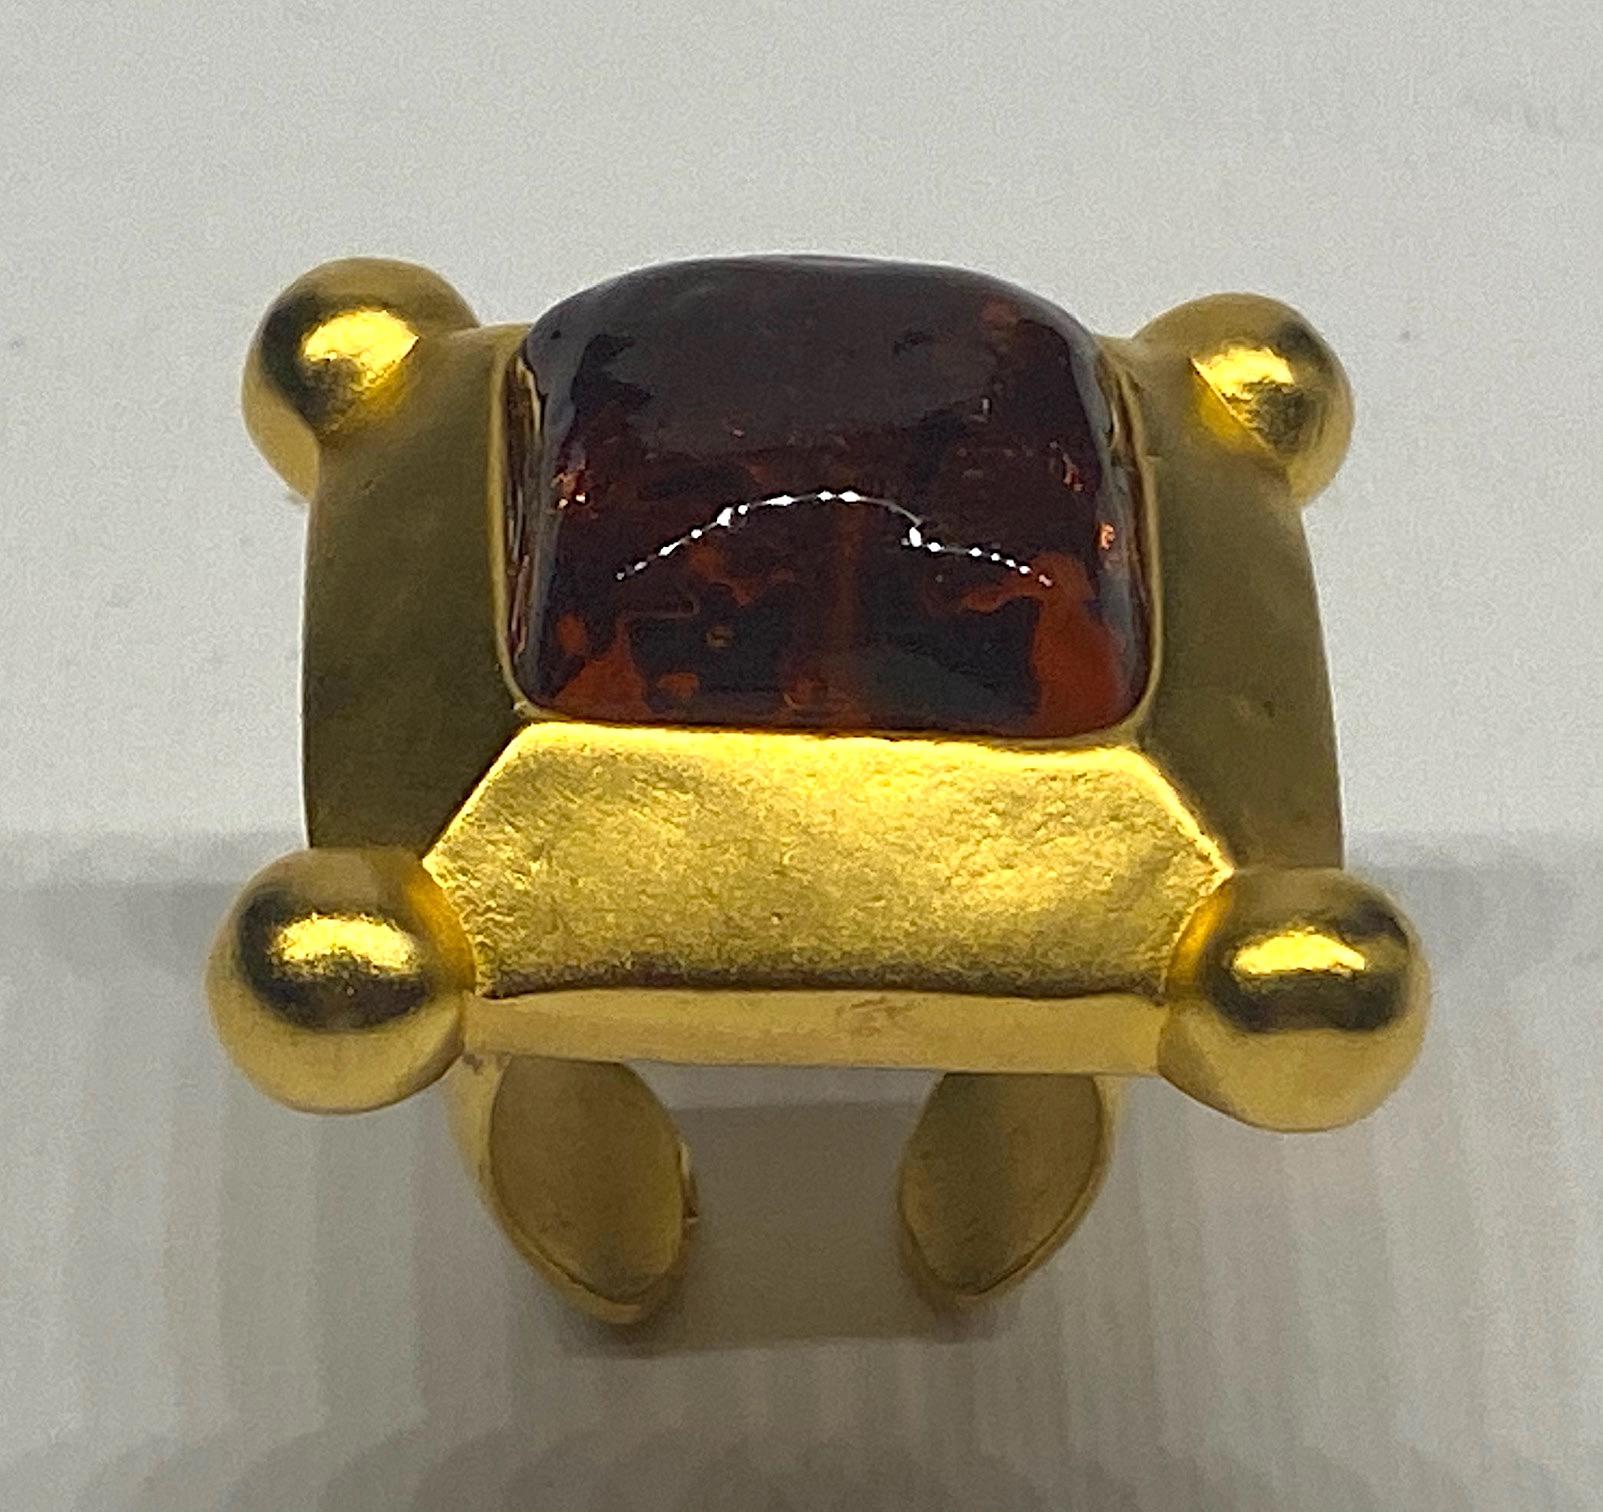 Karl Lagerfeld 1980s Gold & Glass Stone Ring 7